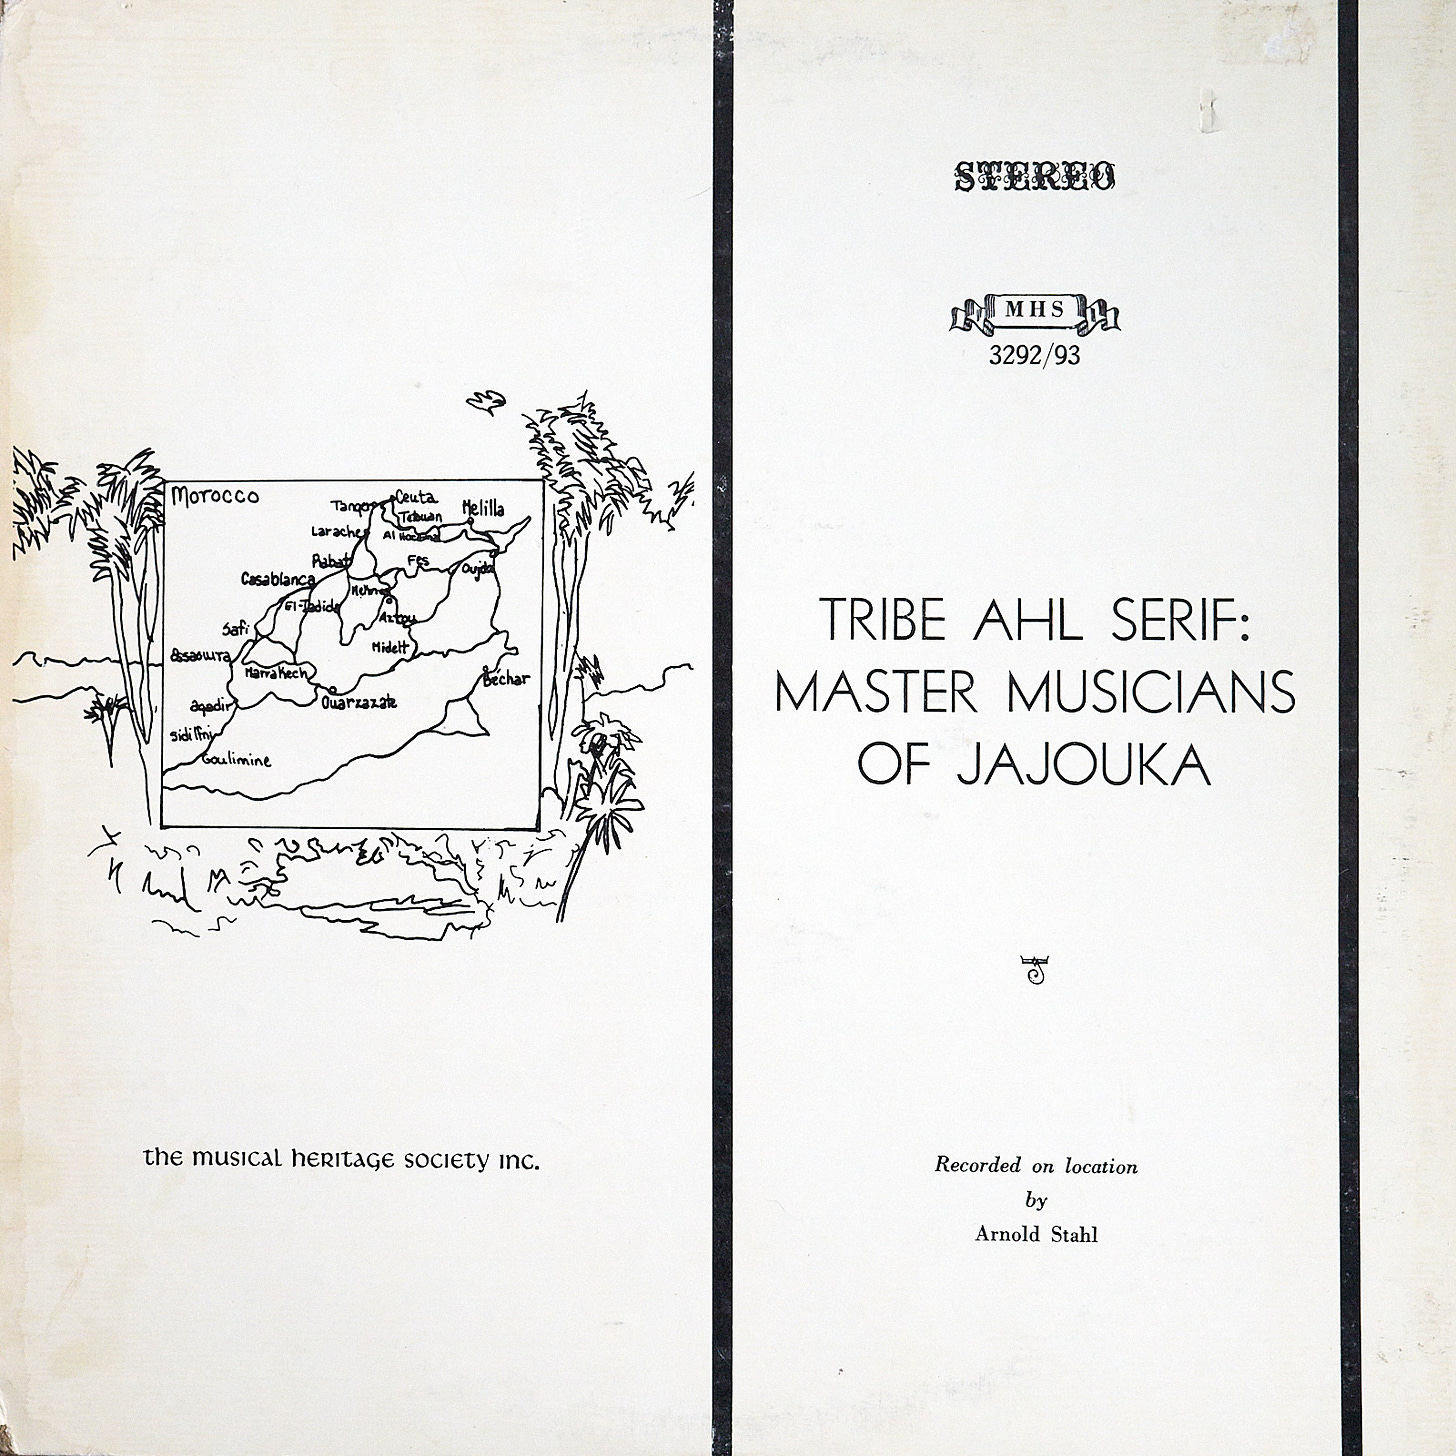 Album cover shows text and pen/ink graphic with a map of Morocco